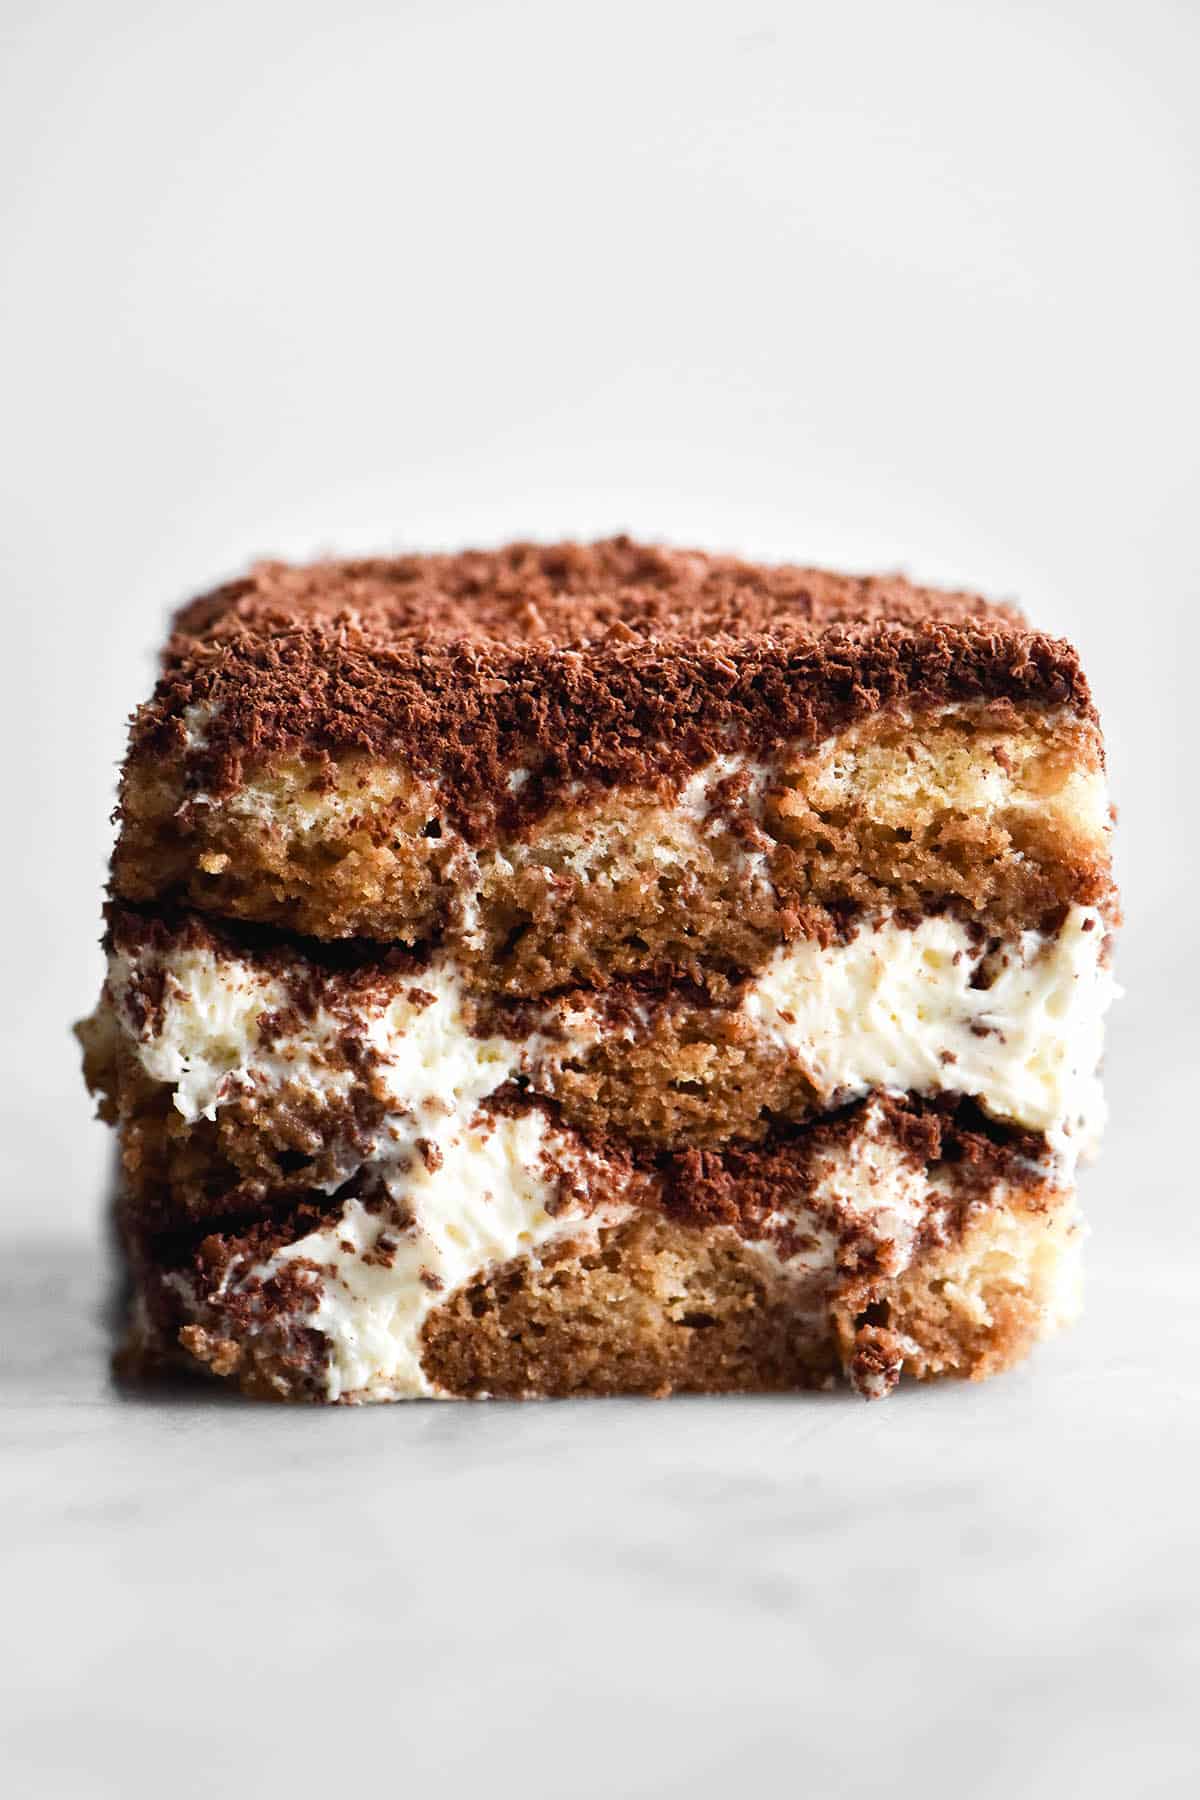 A side on view of a tall slice of gluten free tiramisu on a white marble table against a white backdrop